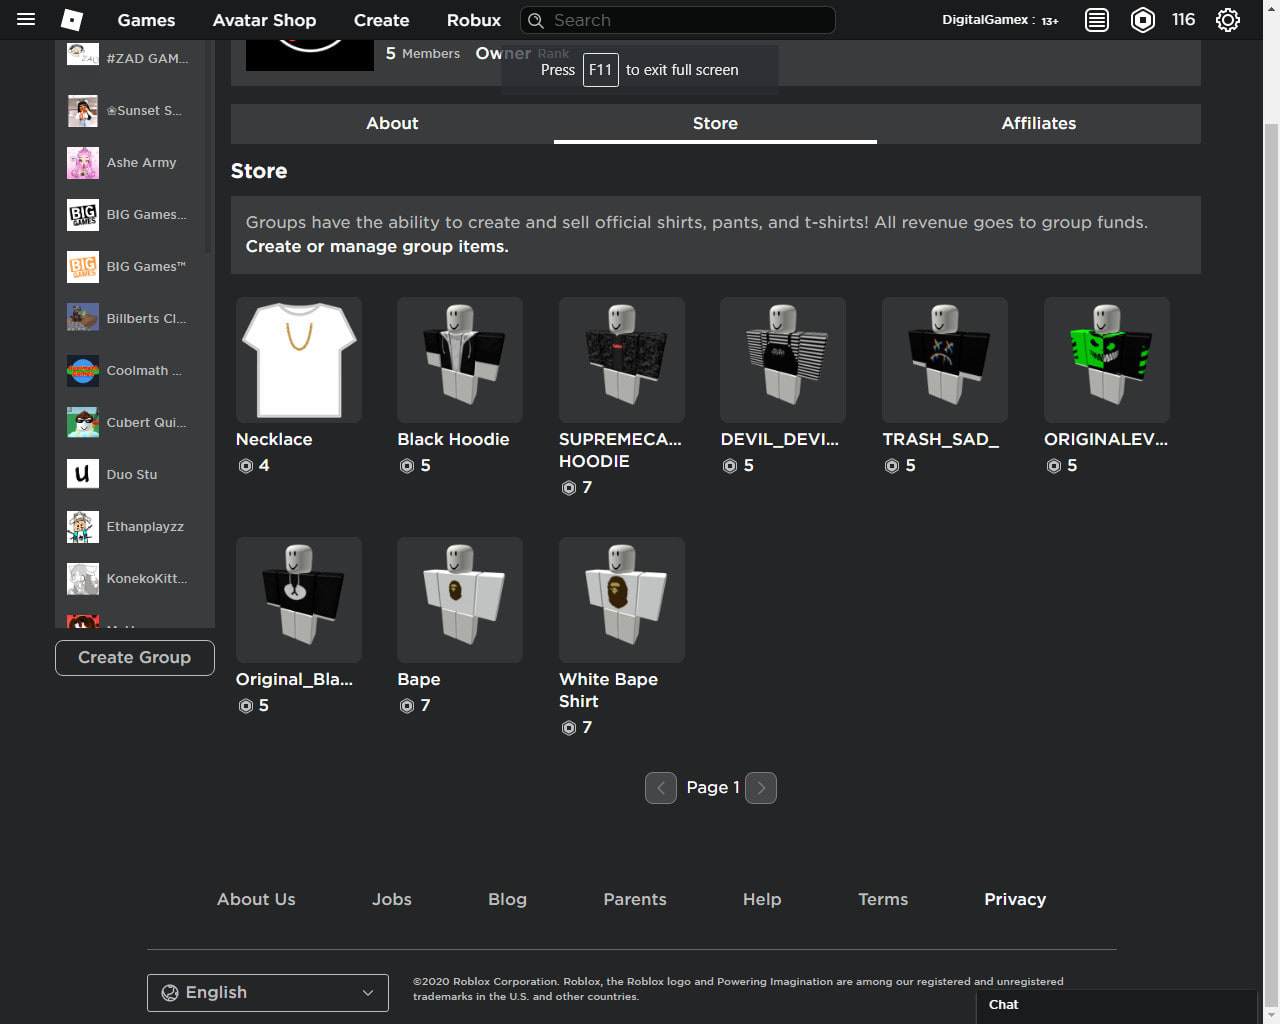 Add Clothes To Your Group By Digitalgamex Fiverr - how to sell shirts on roblox groups